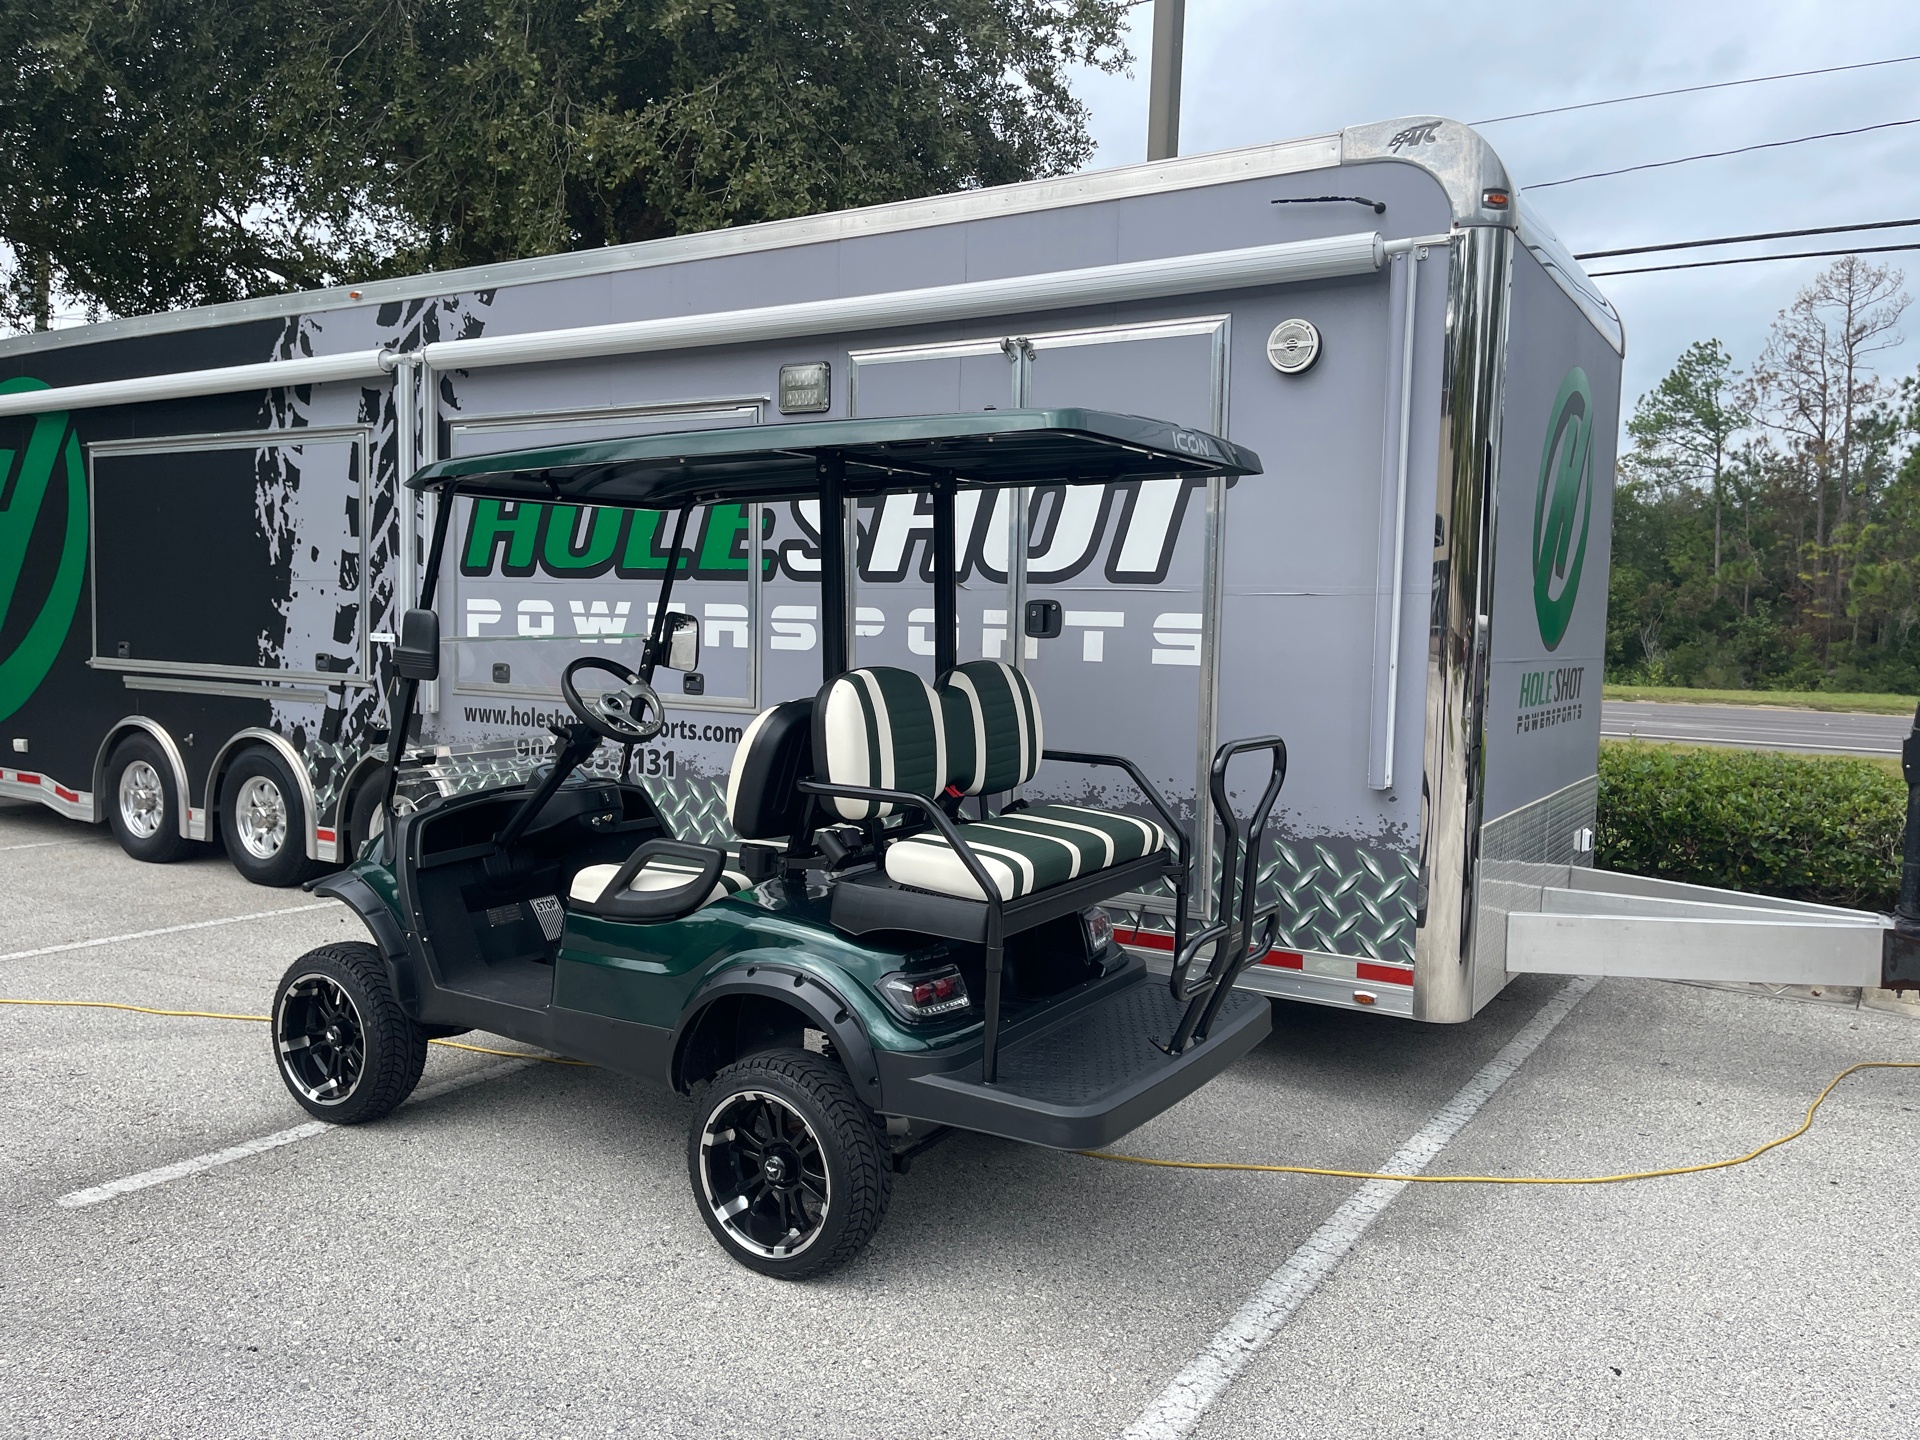 2022 ICON ELECTRIC VEHICLES i40L in Fleming Island, Florida - Photo 2